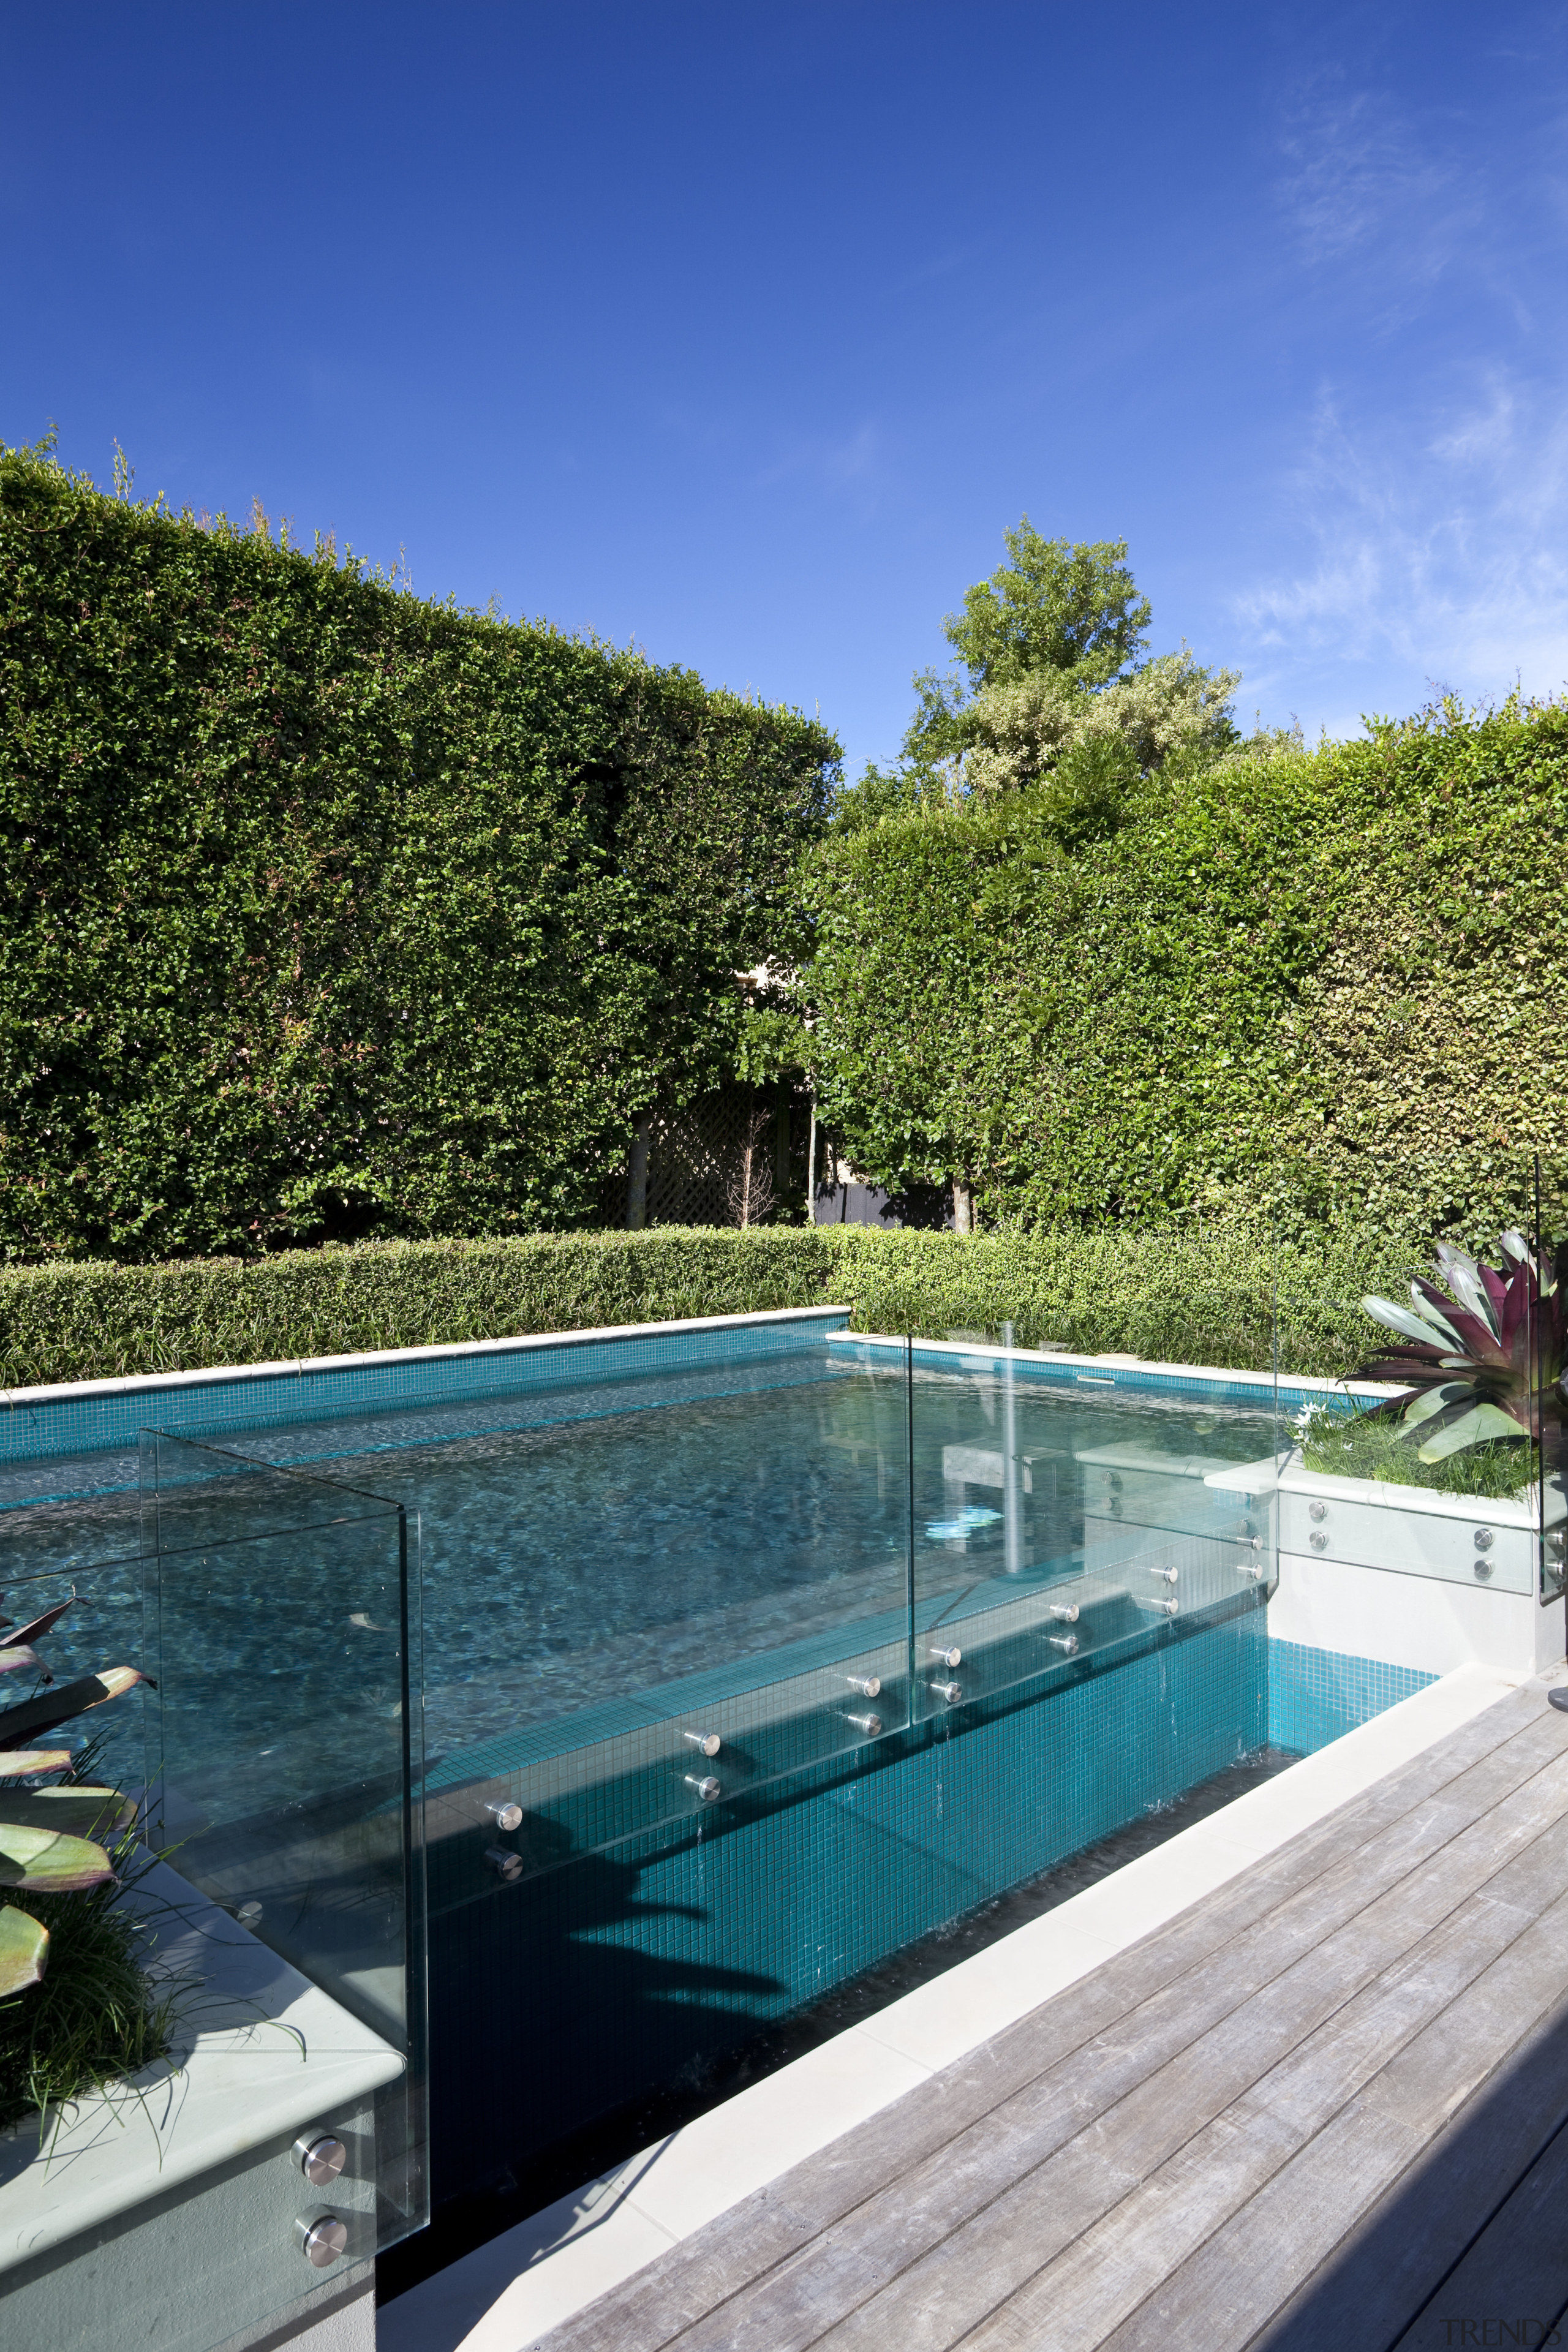 The rear yard of this home has been estate, house, leisure, plant, real estate, reflection, sky, swimming pool, tree, vacation, villa, water, teal